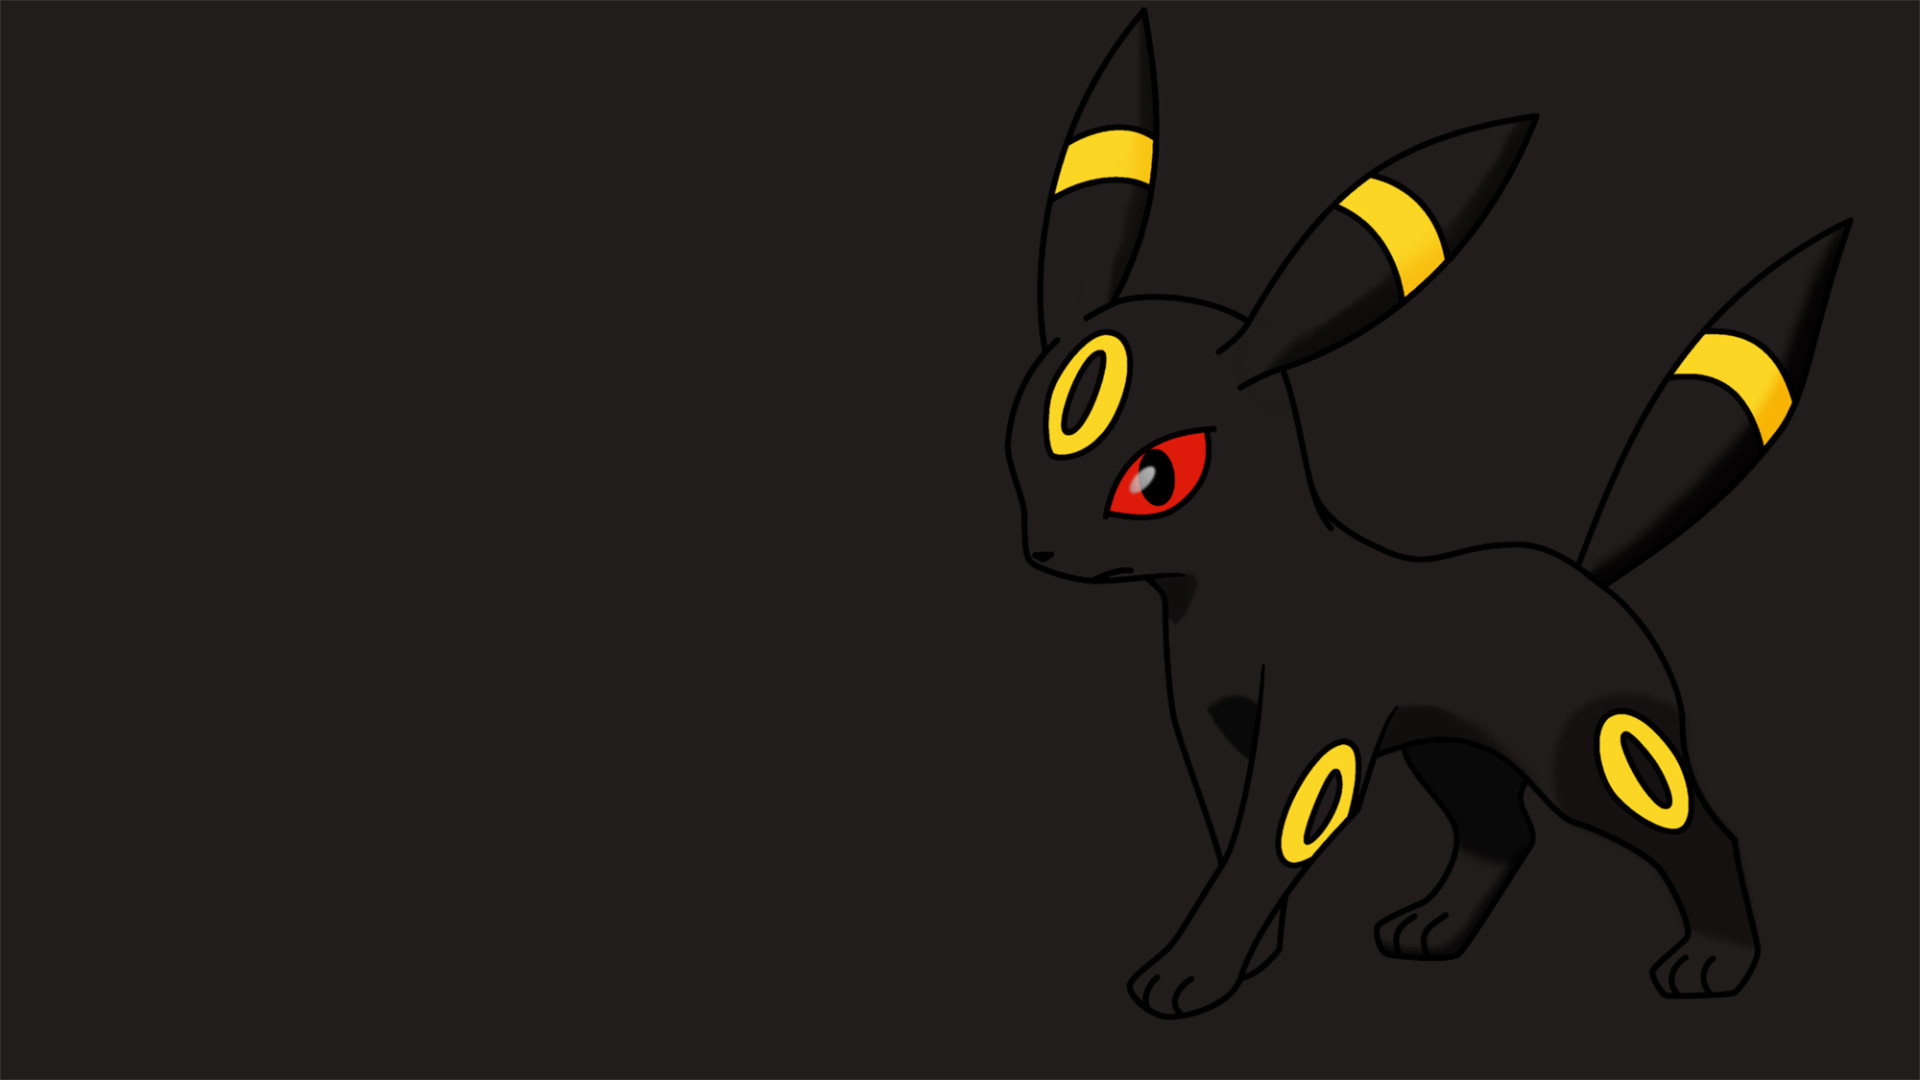 68 Umbreon Wallpapers on WallpaperPlay 1920x1080. 